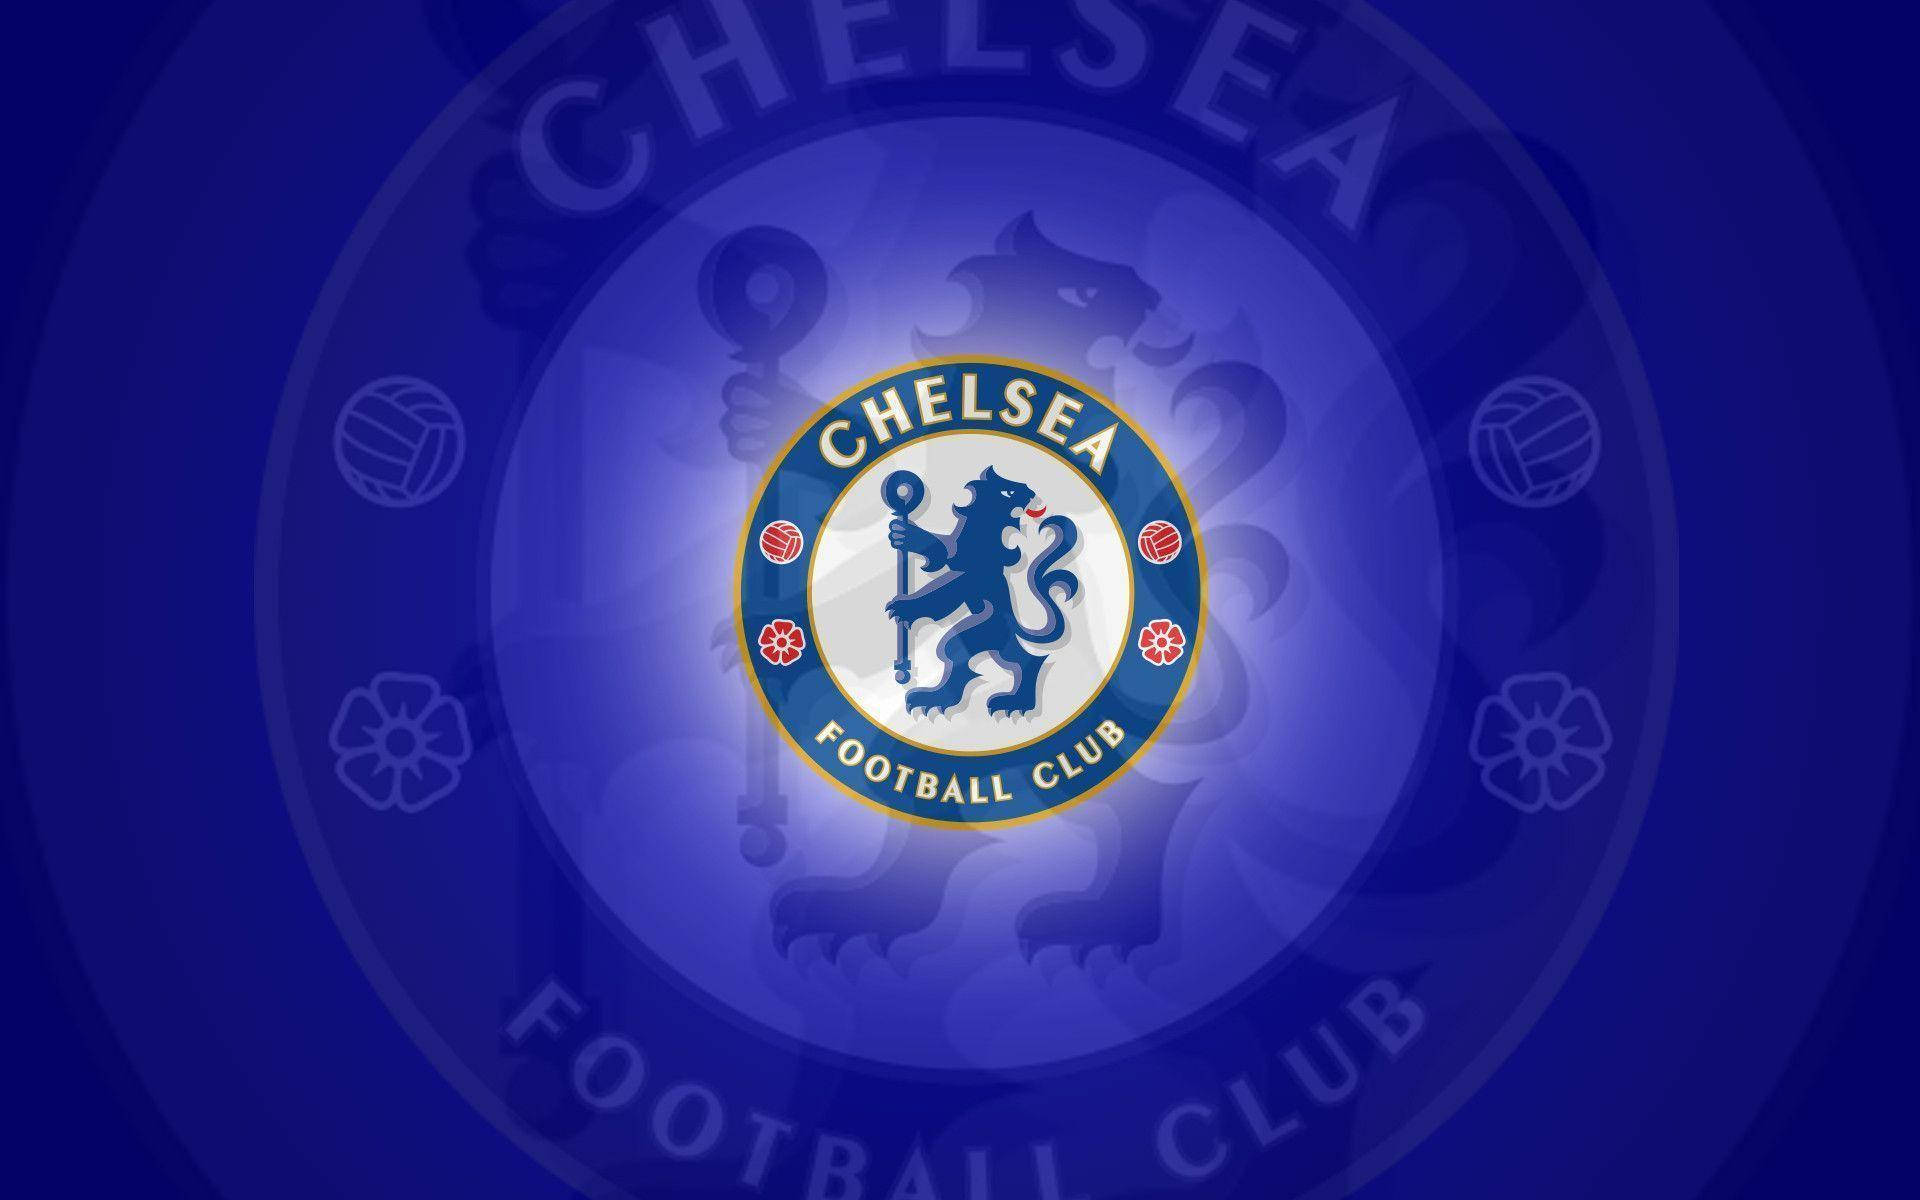 The Chelsea Fc Badge Background